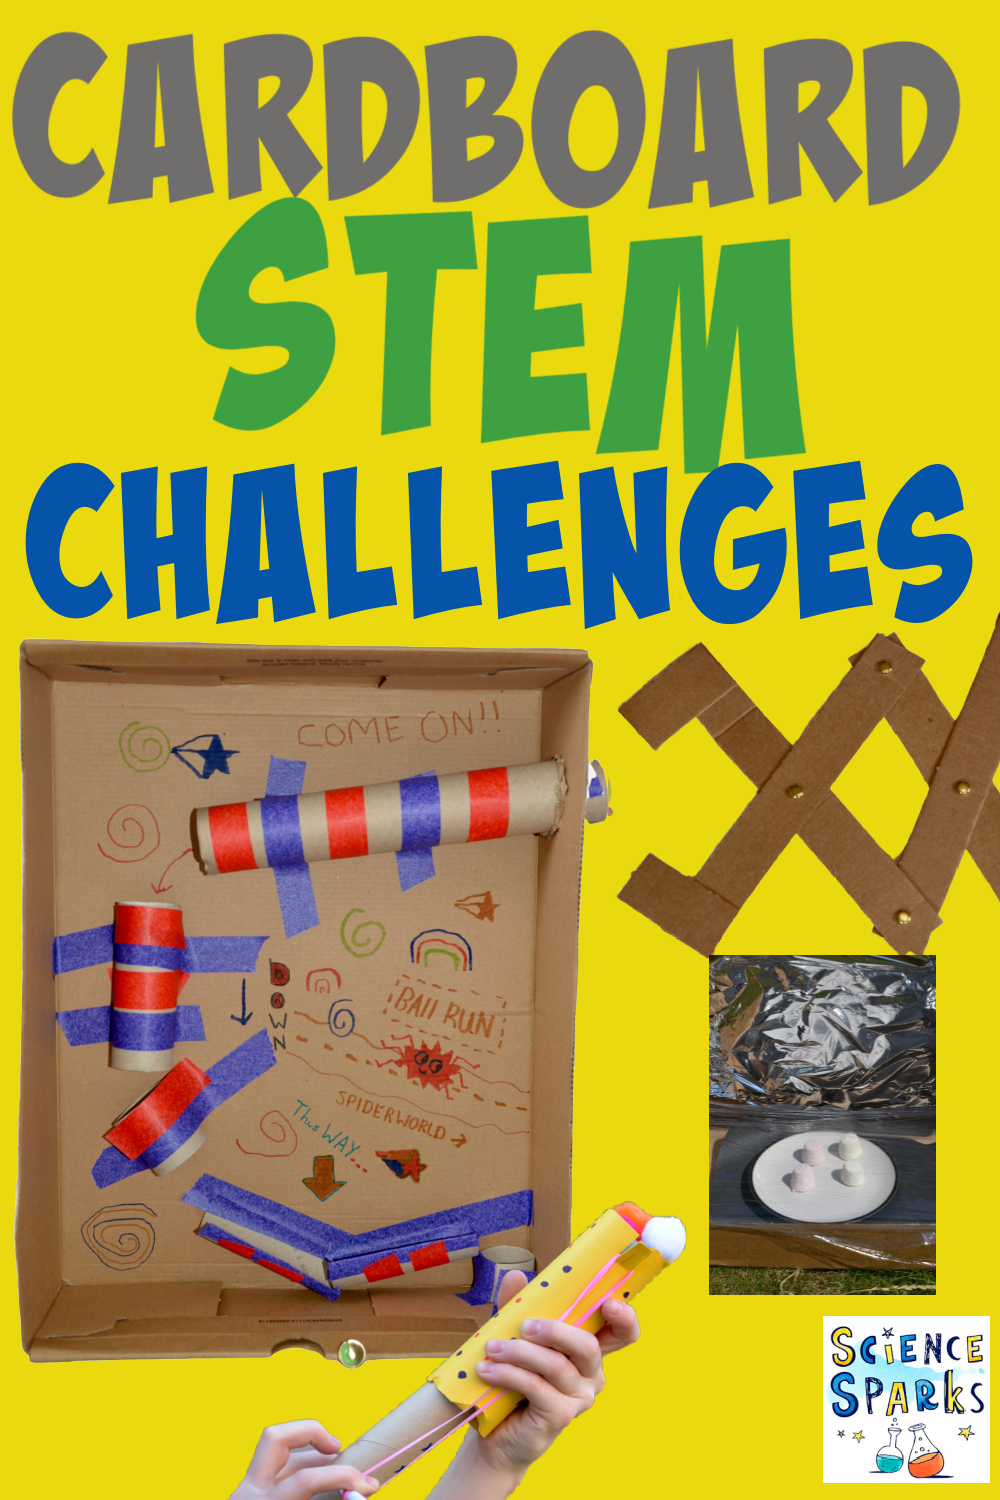 Image of a collection of simple cardboard STEM Challenges for kids